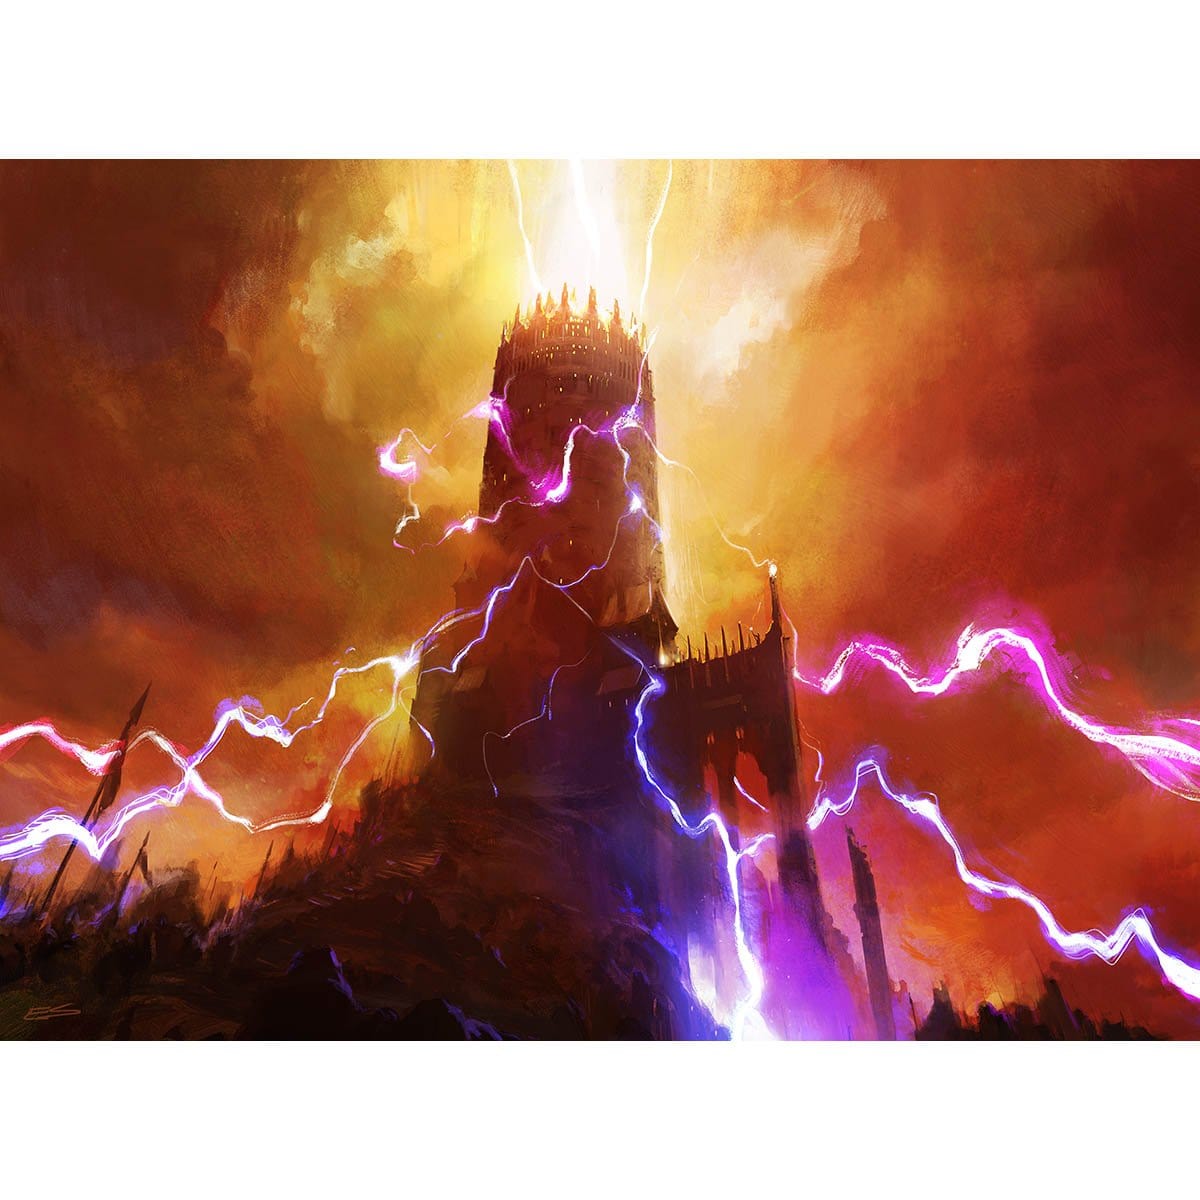 Command Tower Print - Print - Original Magic Art - Accessories for Magic the Gathering and other card games